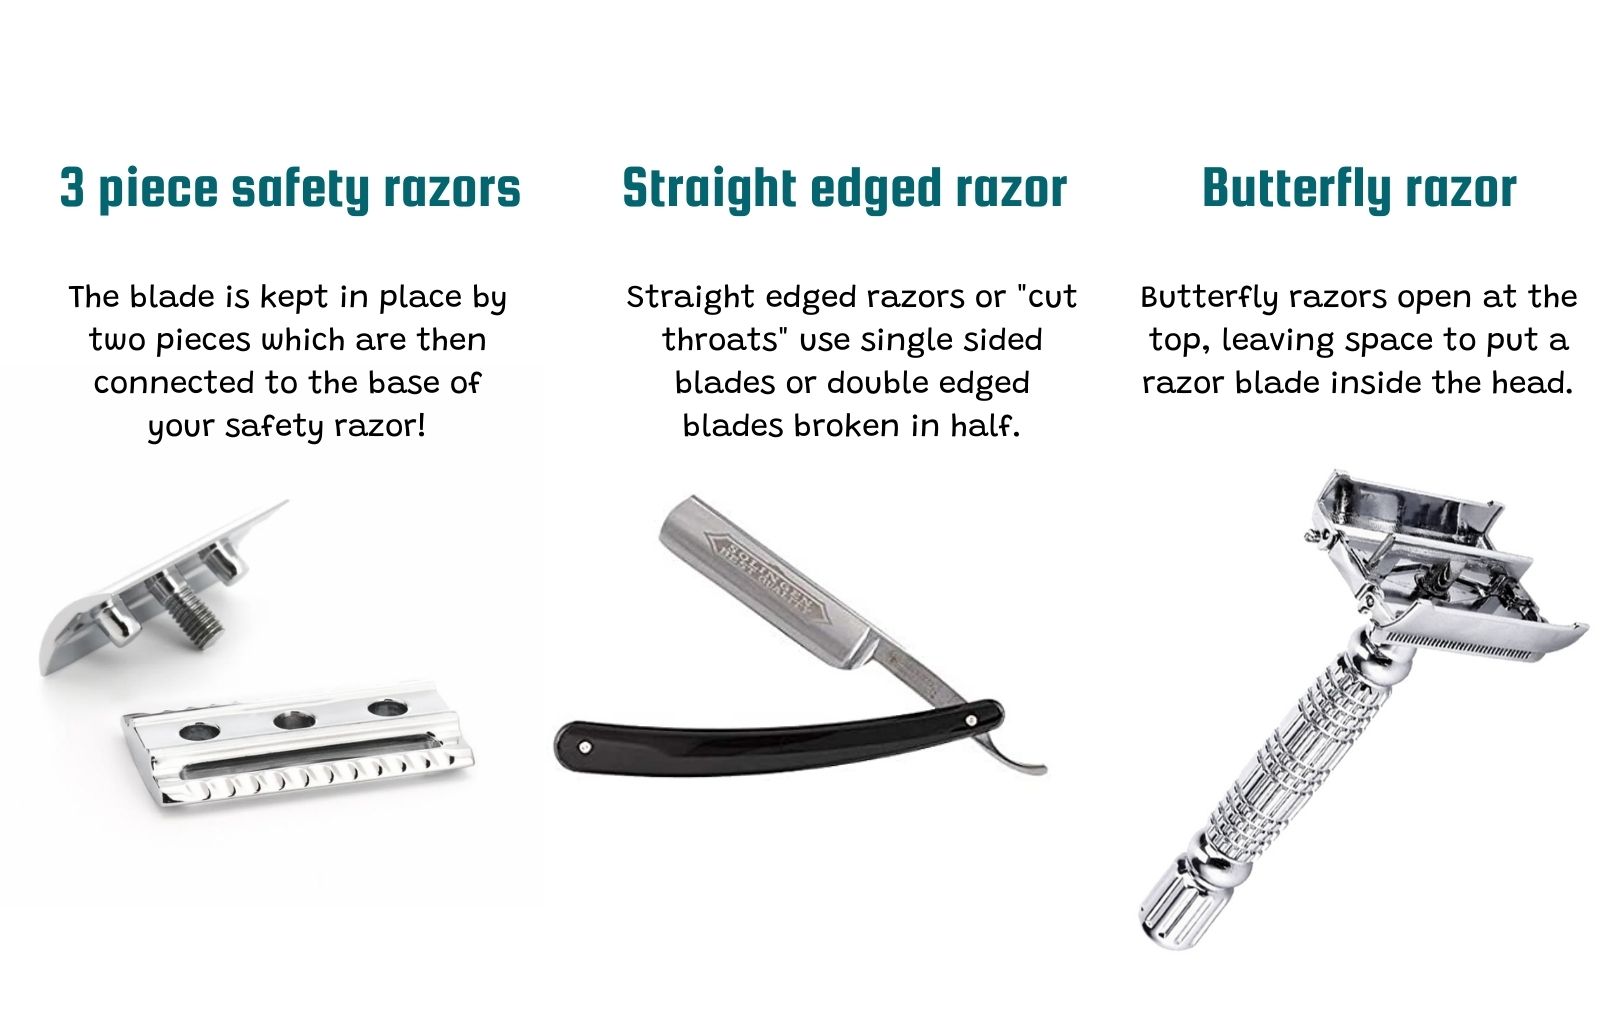 Safety Razor Straight Razor: Which One Is The Better Option? | vlr.eng.br